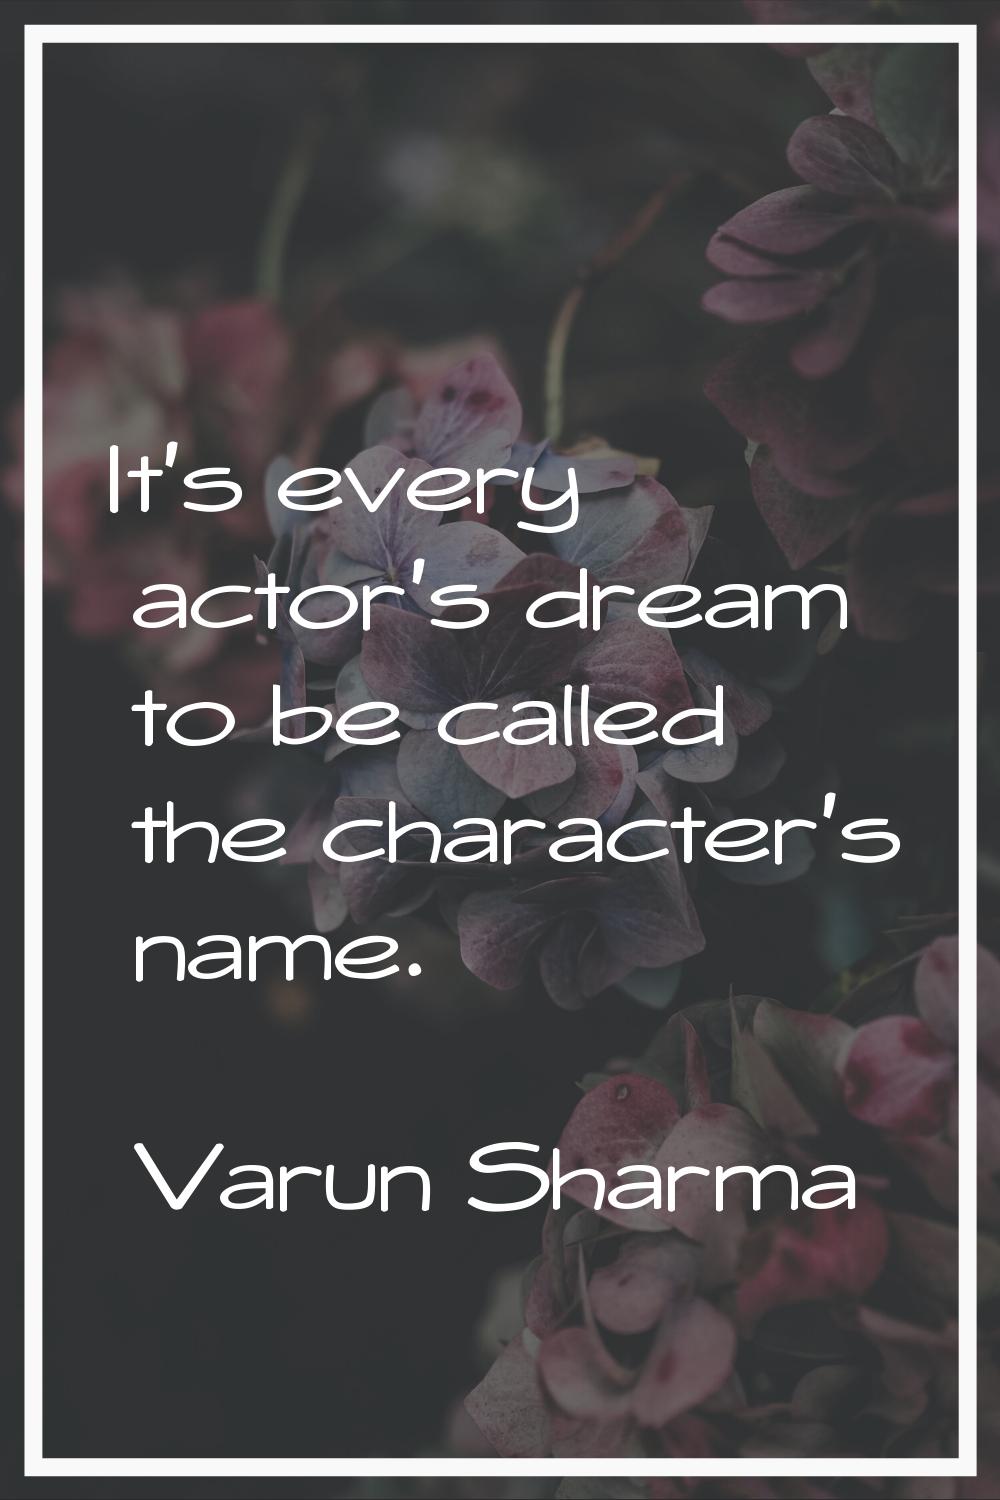 It's every actor's dream to be called the character's name.